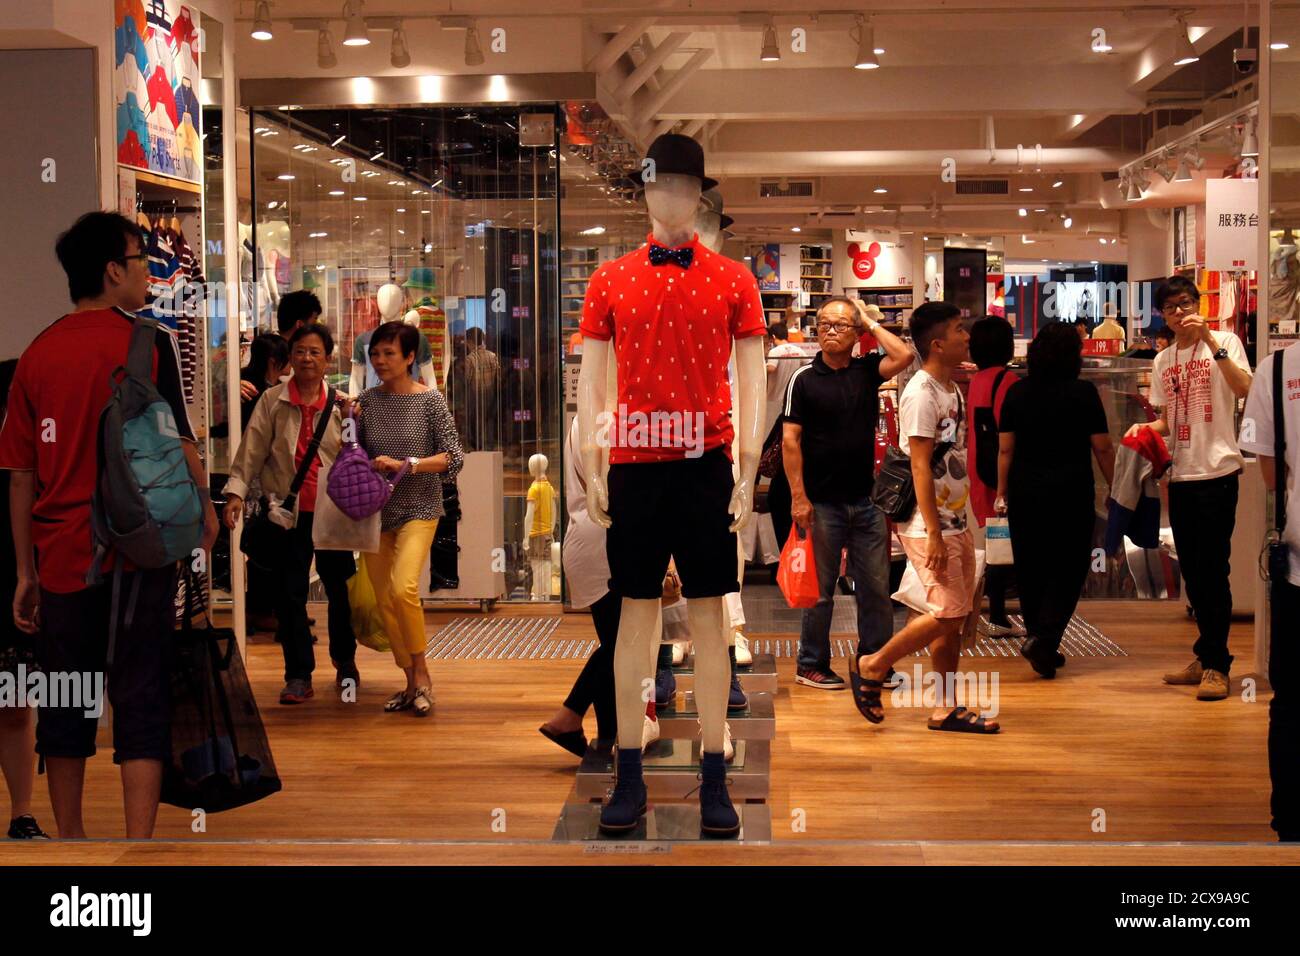 Shoppers walk inside flagship store of Japanese fashion house Uniqlo at  Hong Kong's Causeway Bay shopping district May 9, 2013. Armed with empty  suitcases and same-day return tickets, an army of mainland